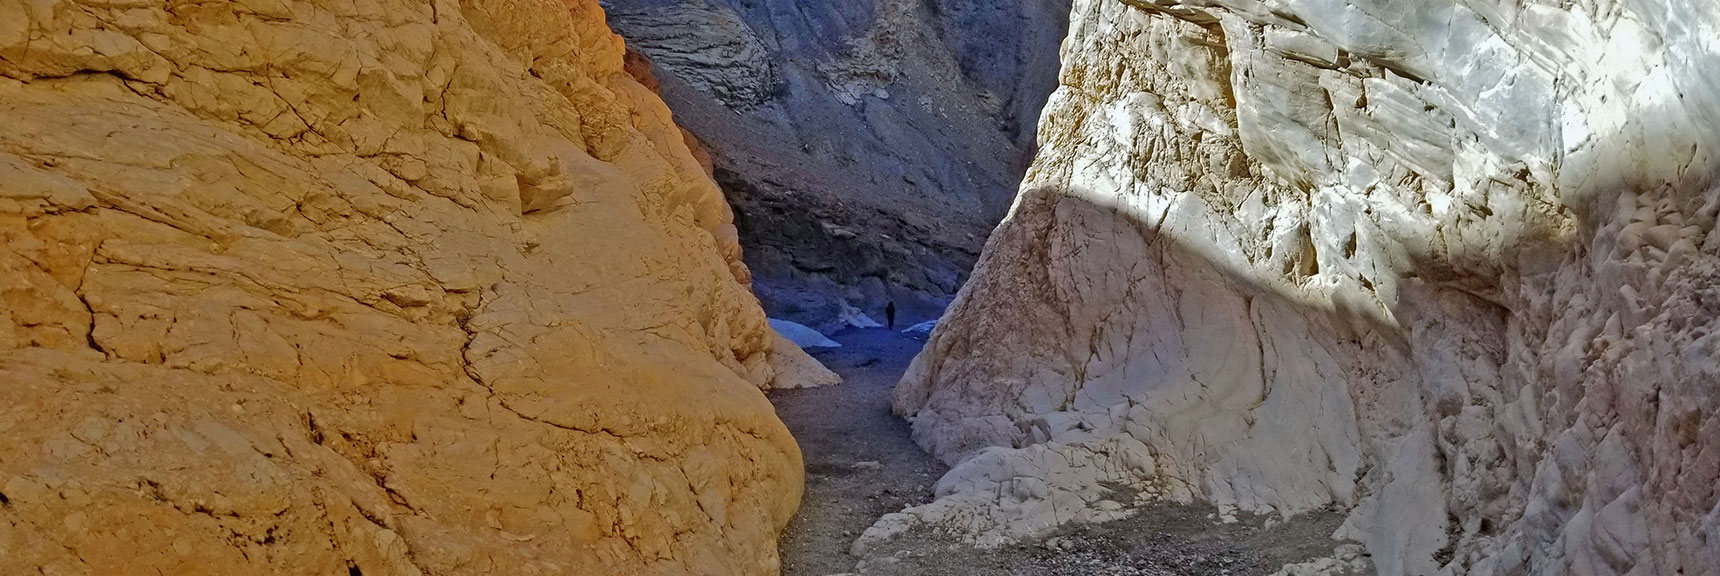 Mosaic Canyon, Above Stovepipe Wells, Death Valley National Park, California